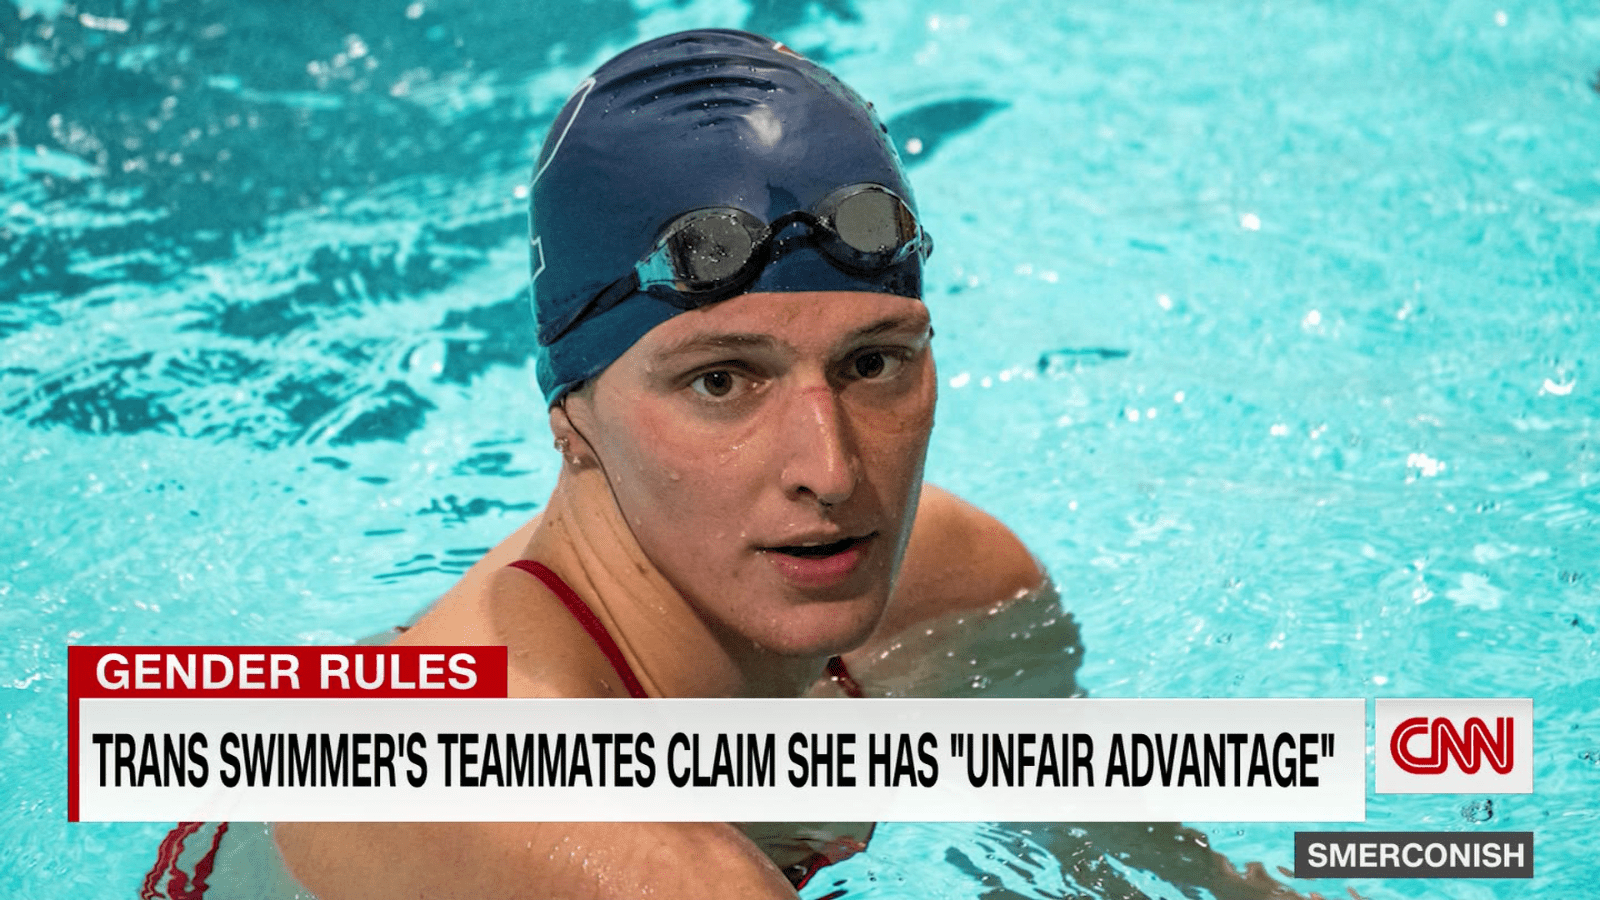 Lia Thomas Transgender swimmer says 'trans women are not a threat to